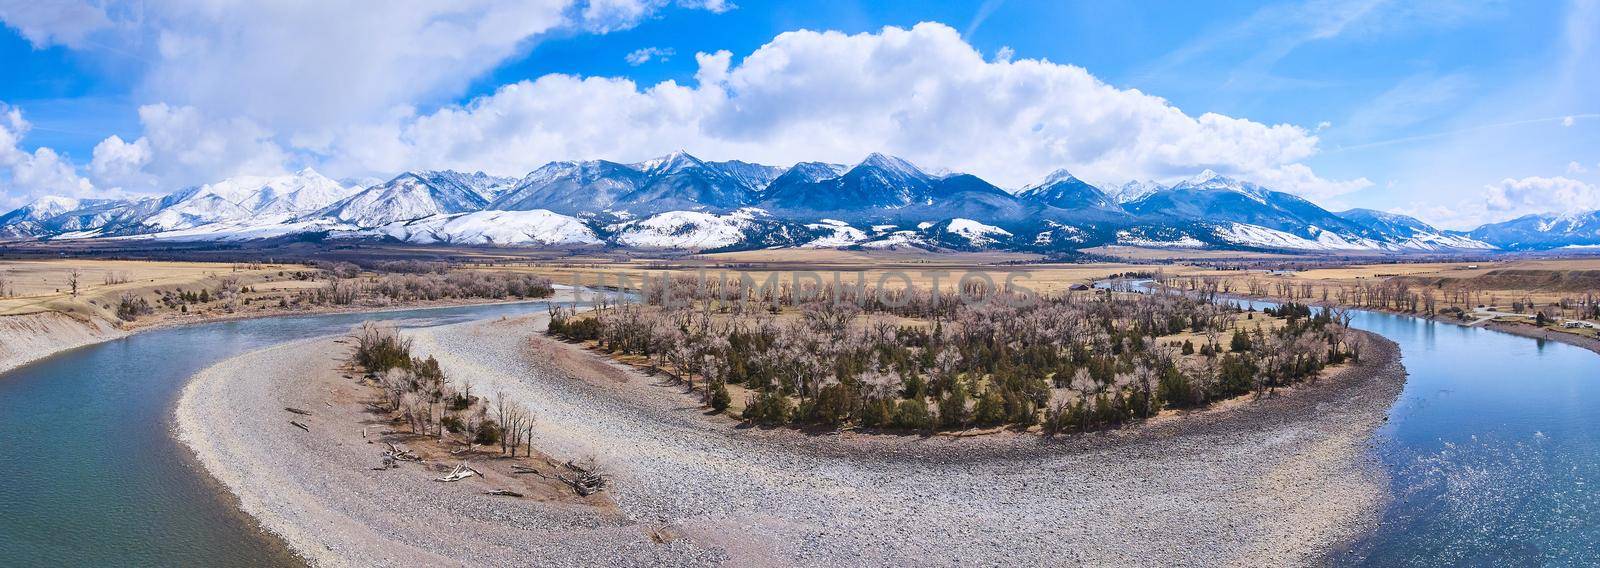 Panorama of river curving around spring forest with stunning mountain covered in snow on horizon by njproductions